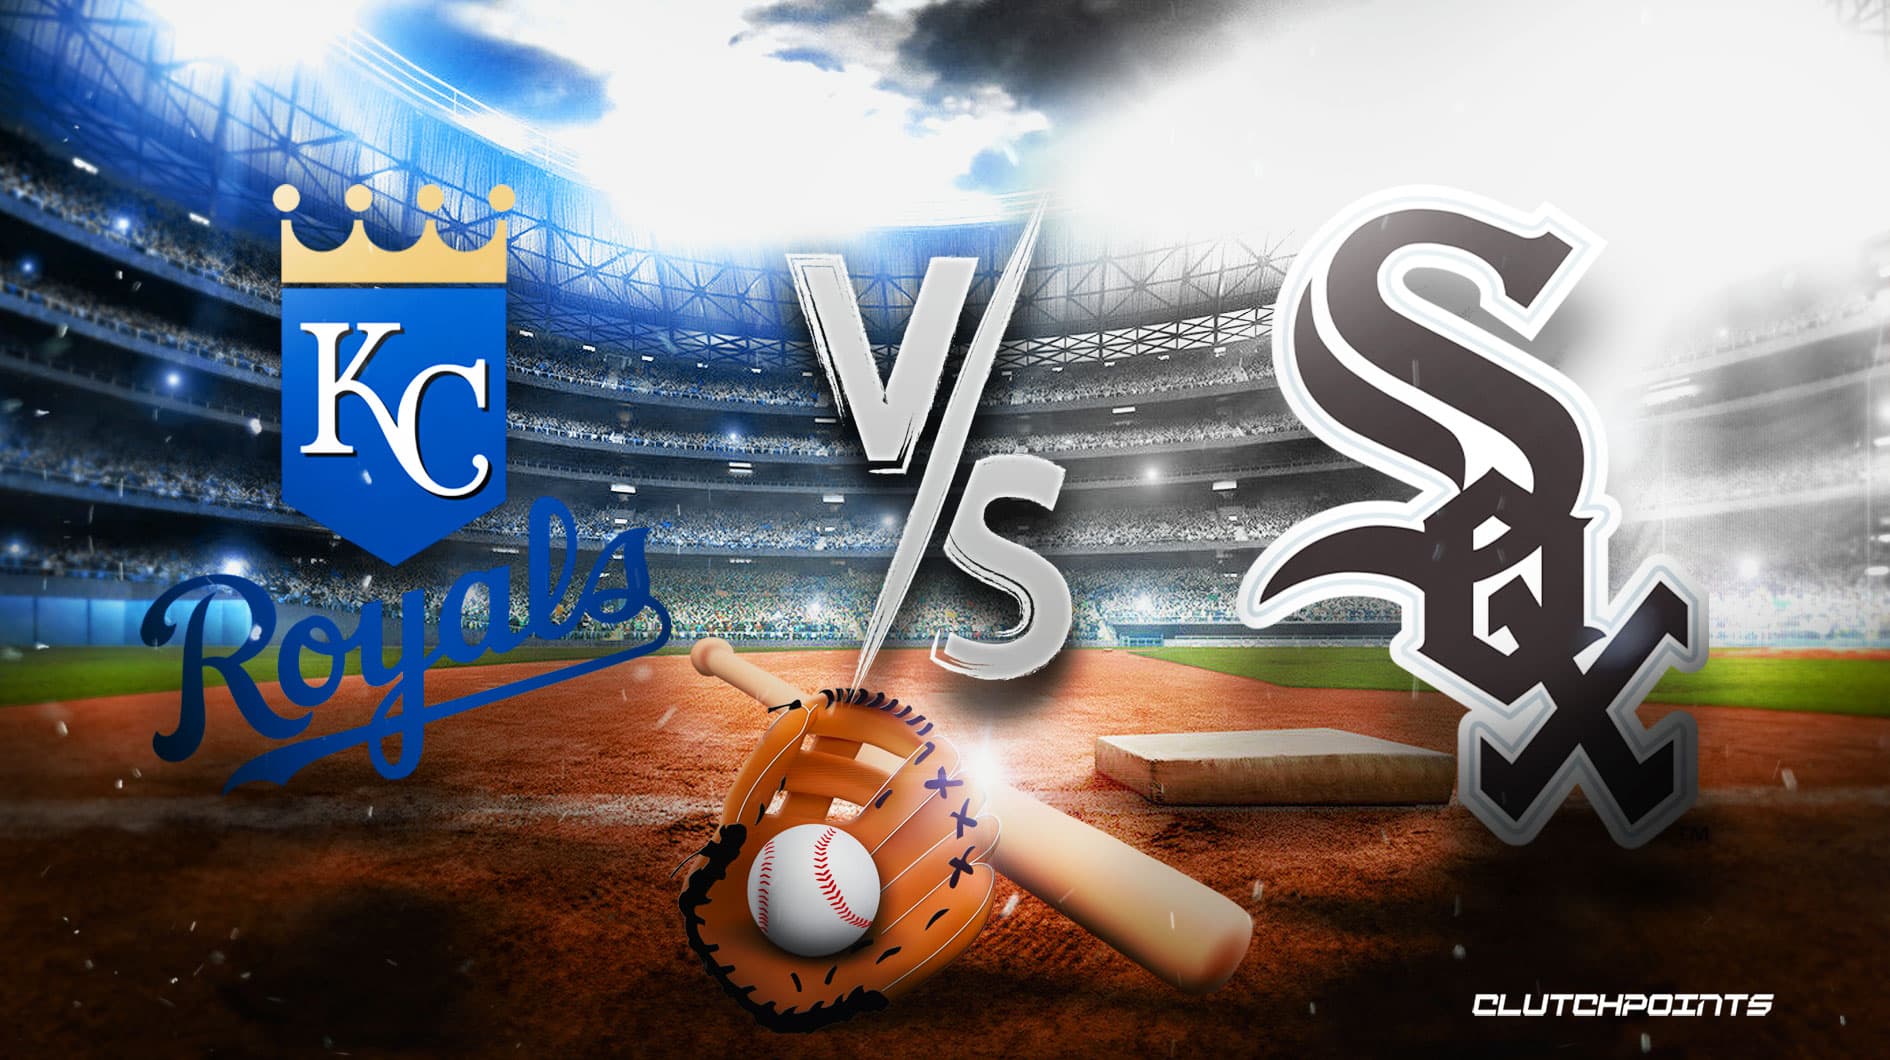 RoyalsWhite Sox Odds Prediction, pick, how to watch MLB game